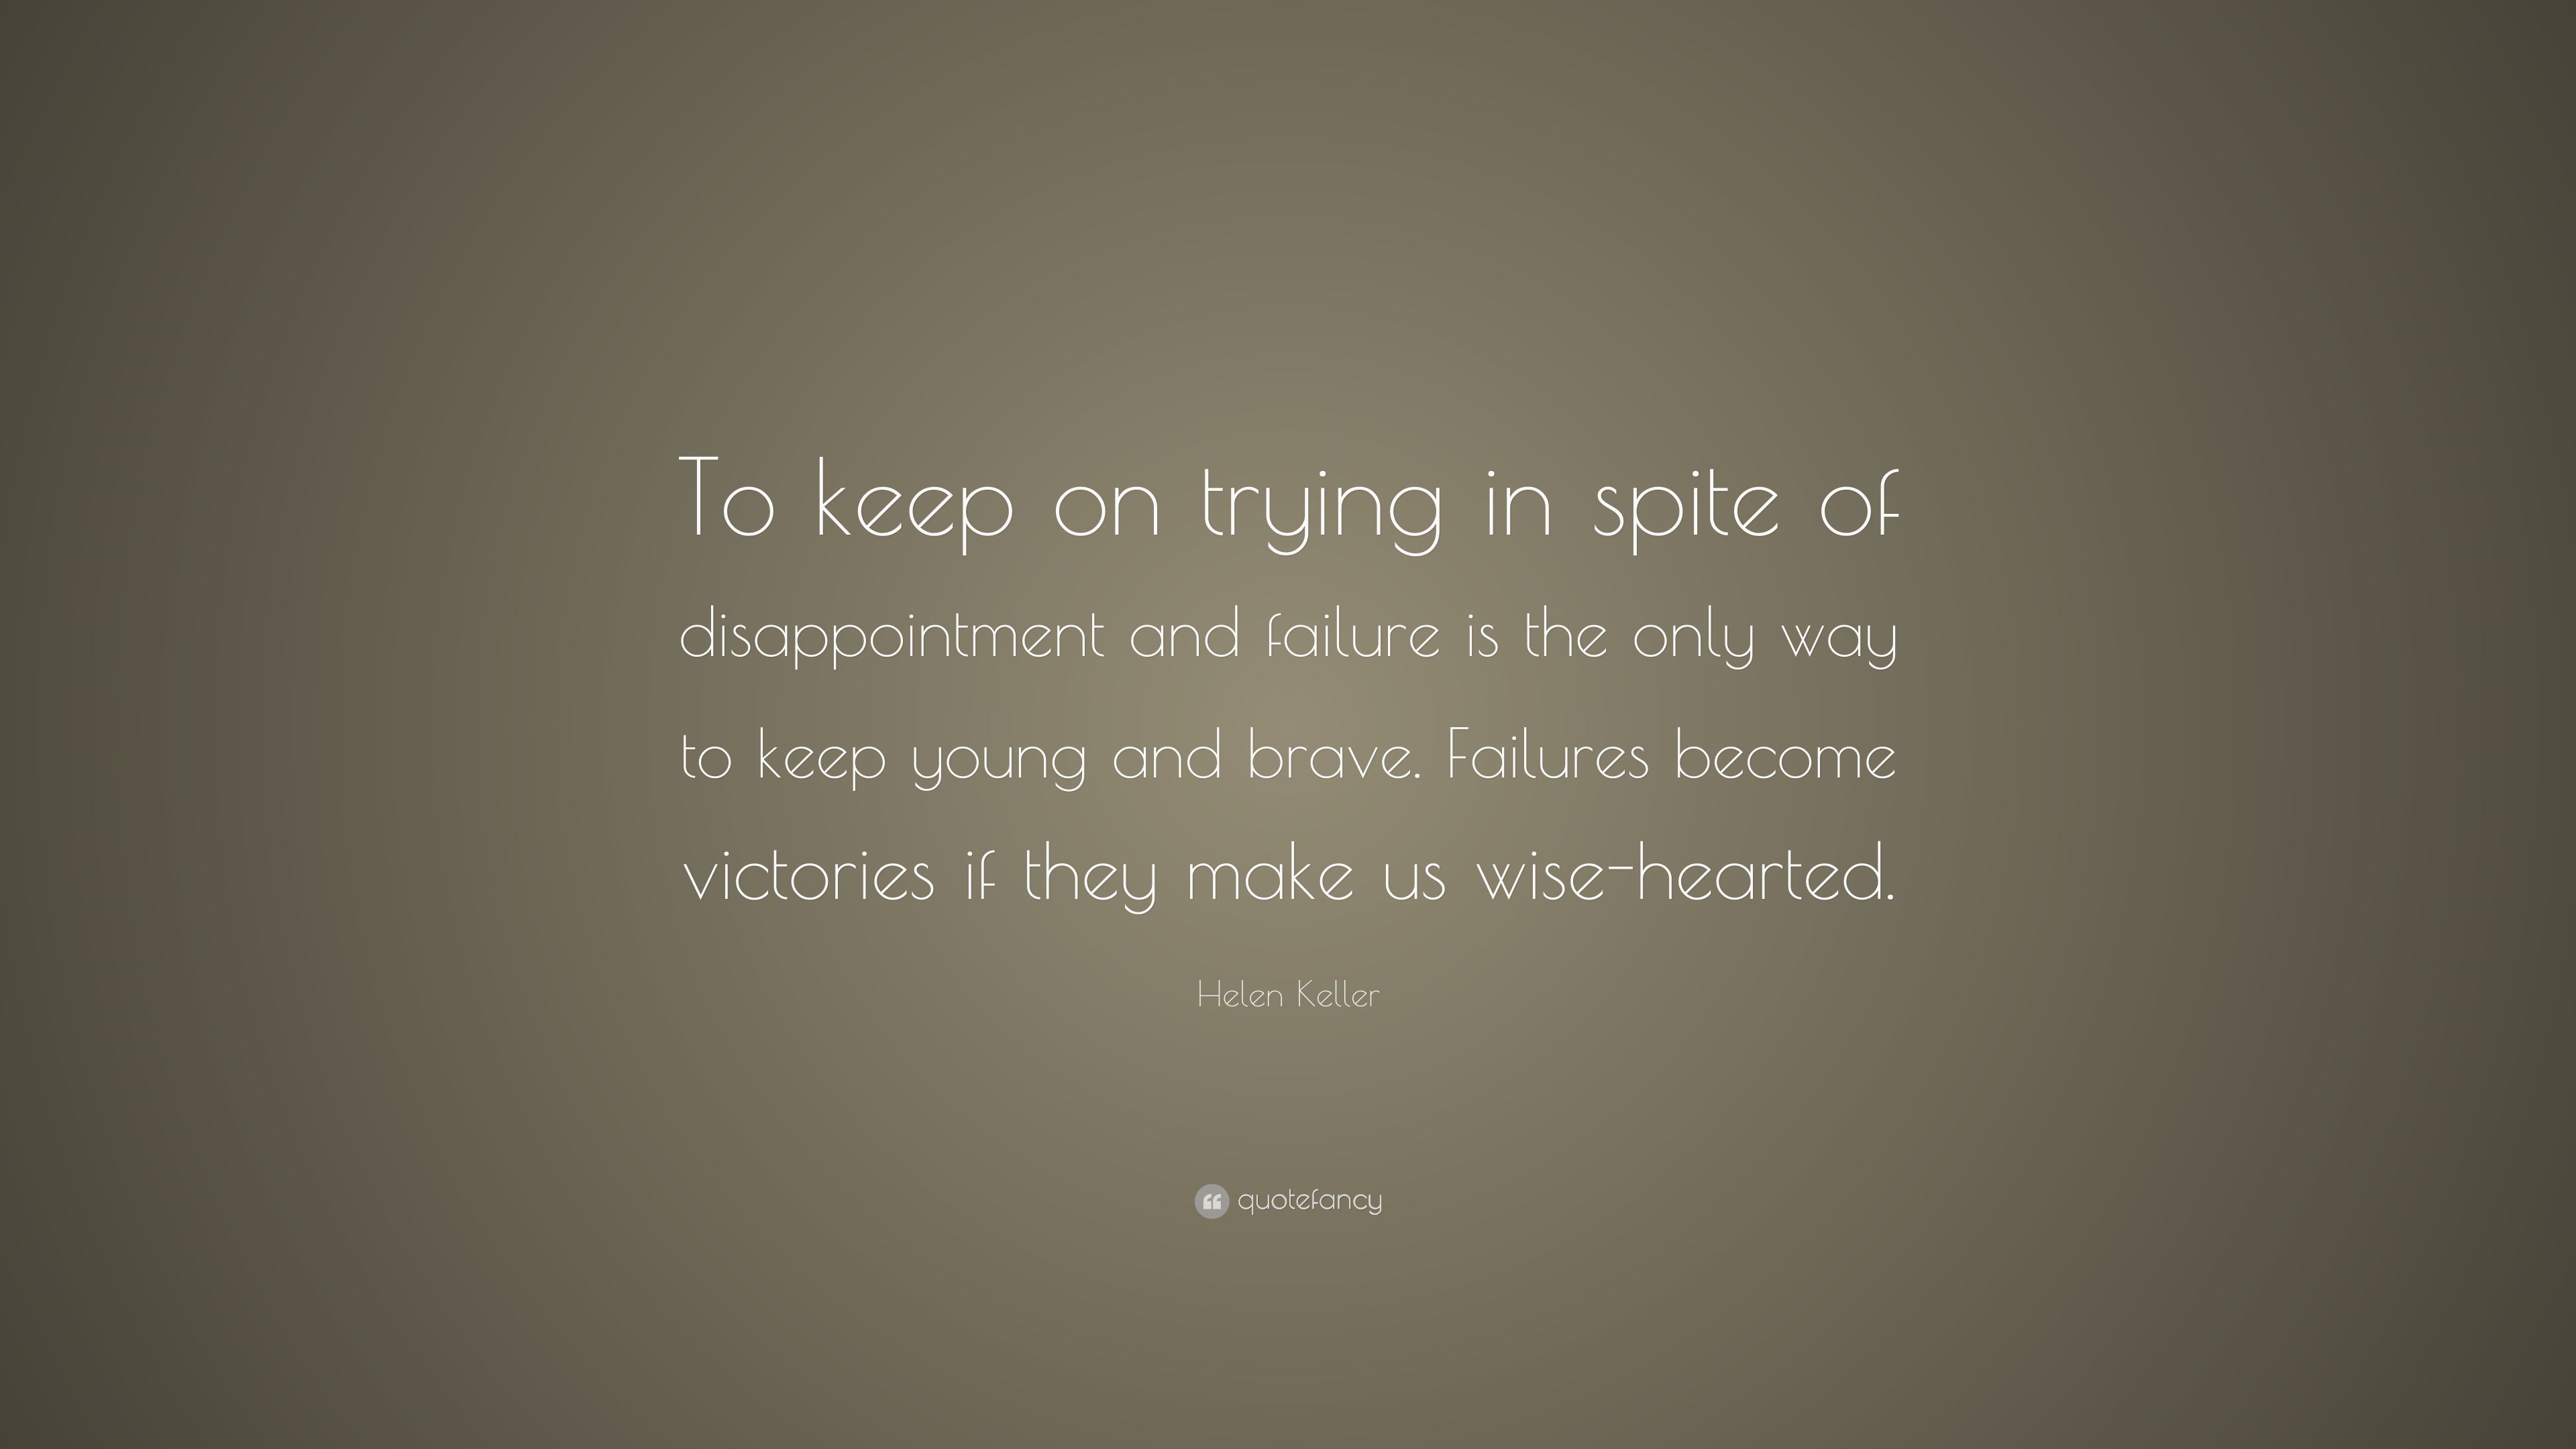 Helen Keller Quote: “To keep on trying in spite of disappointment and failure is the only way to keep young and brave. Failures become victor.” (12 wallpaper)